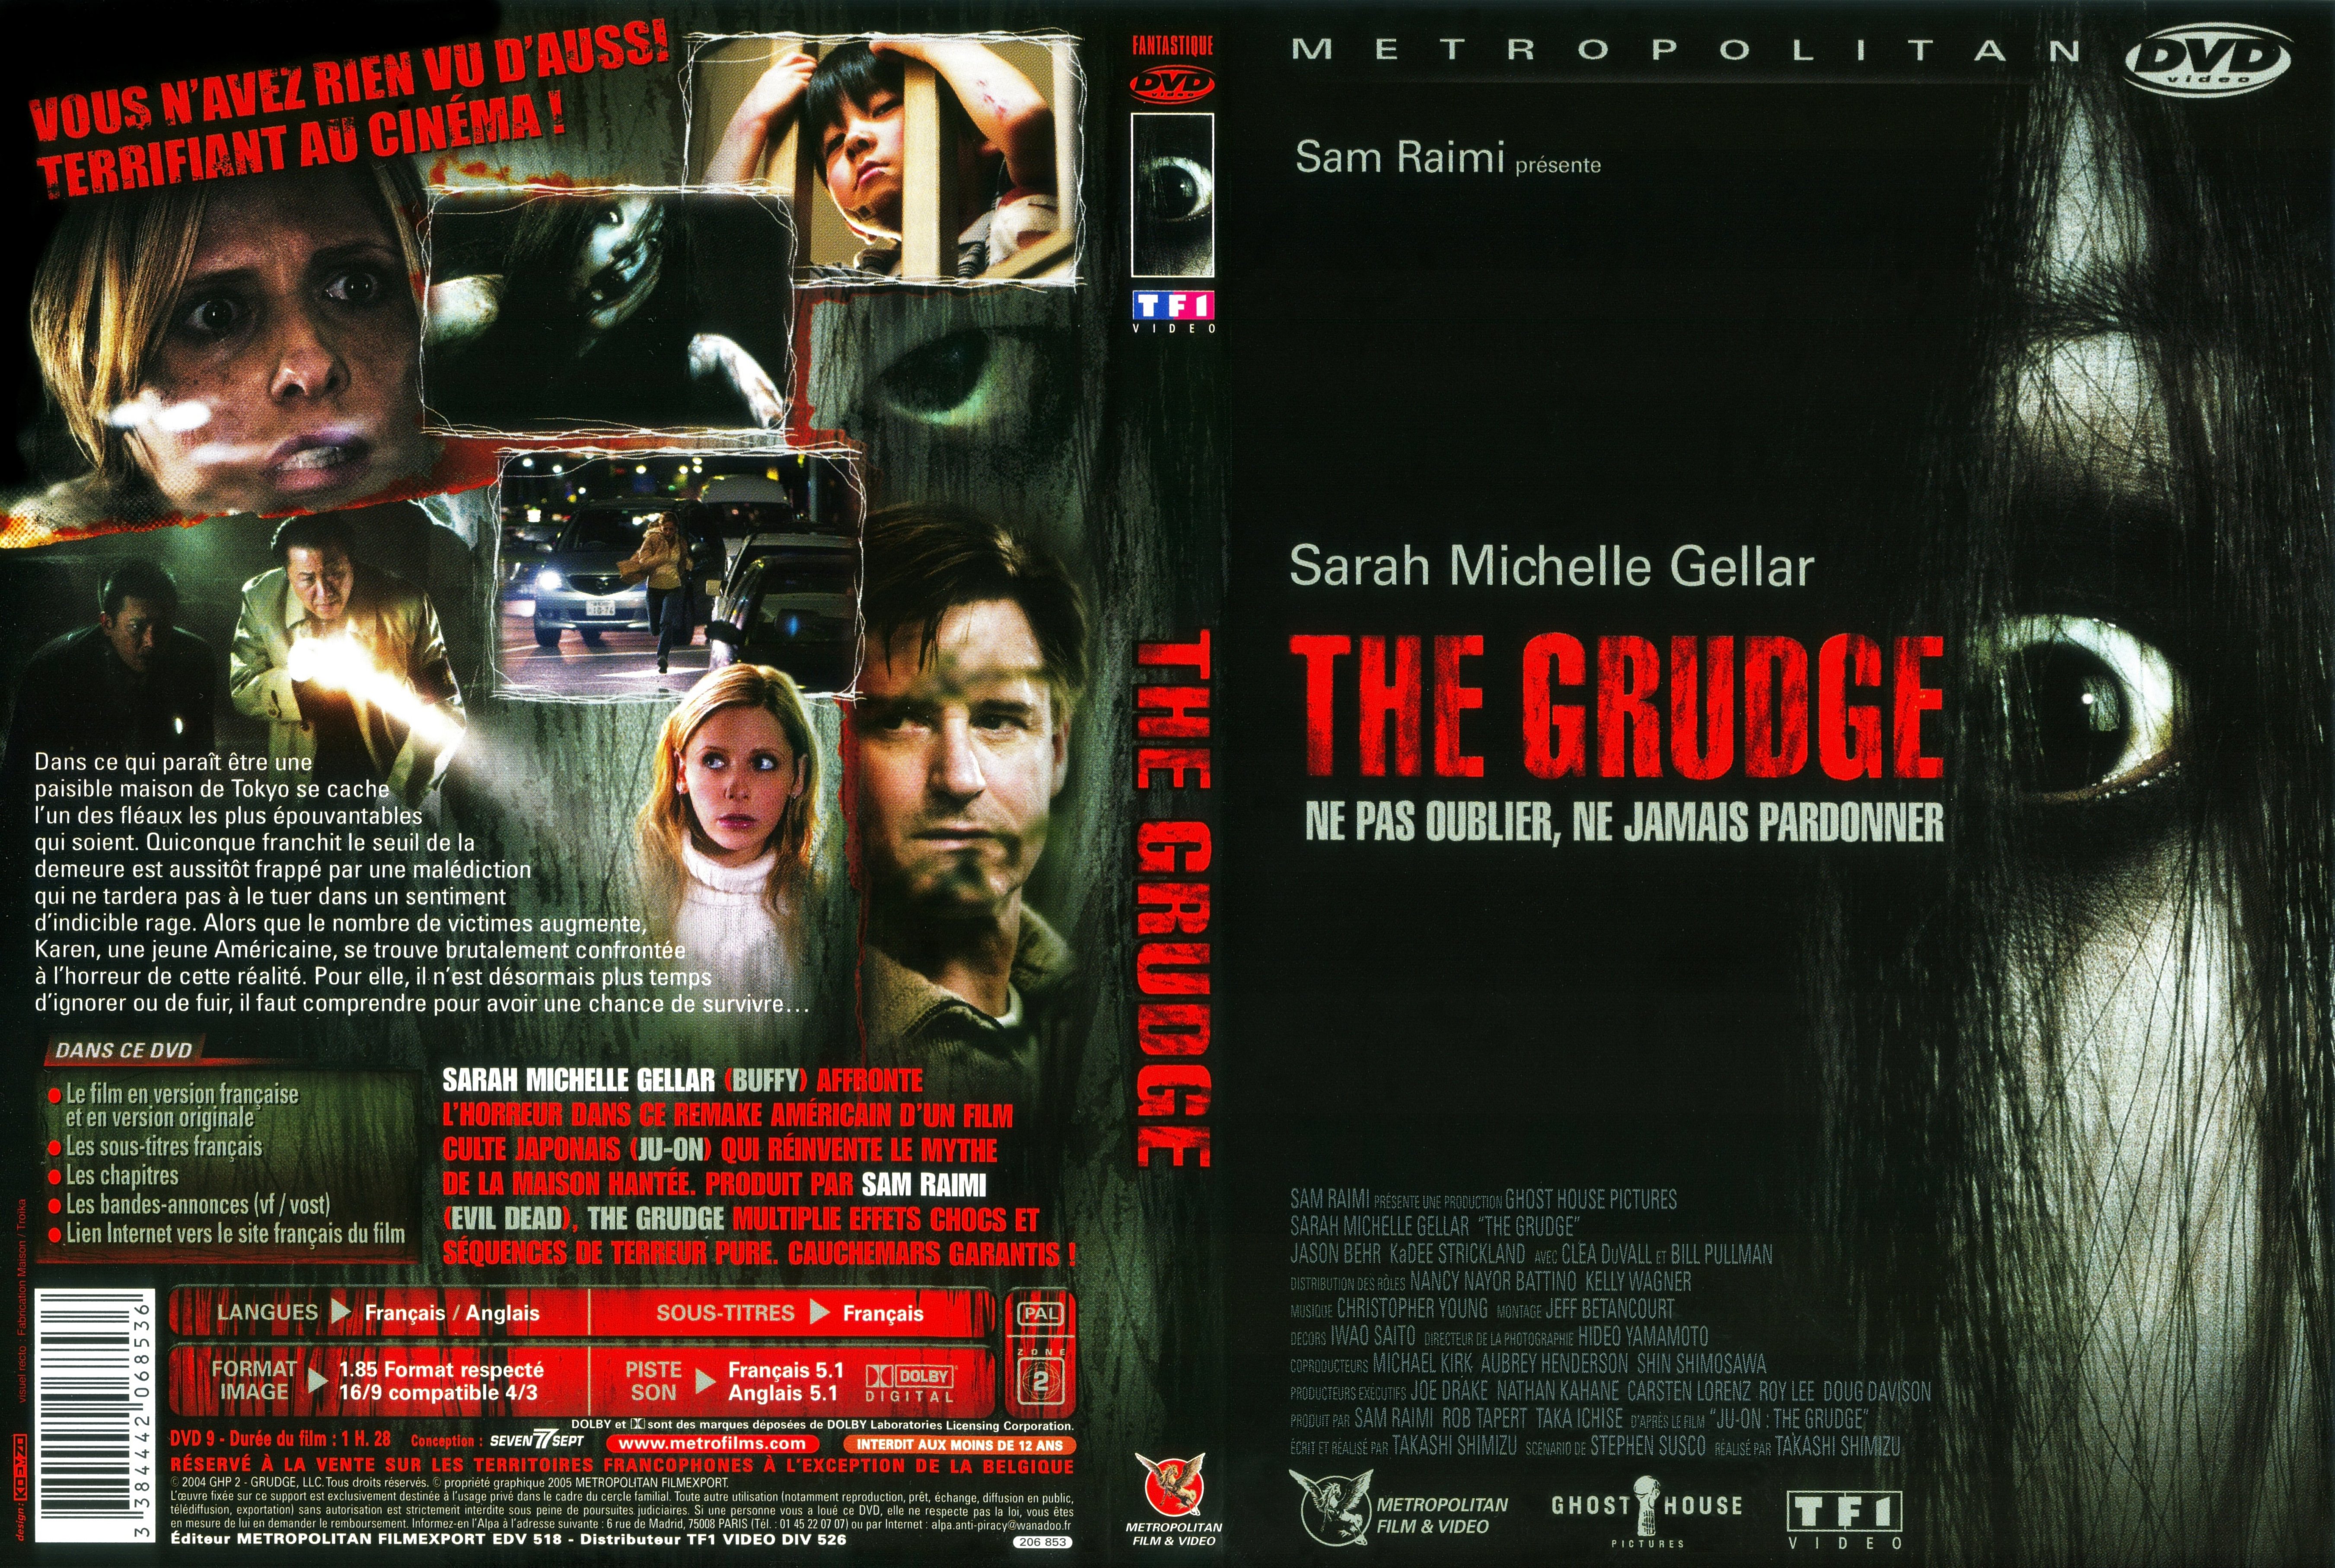 Jaquette DVD The Grudge